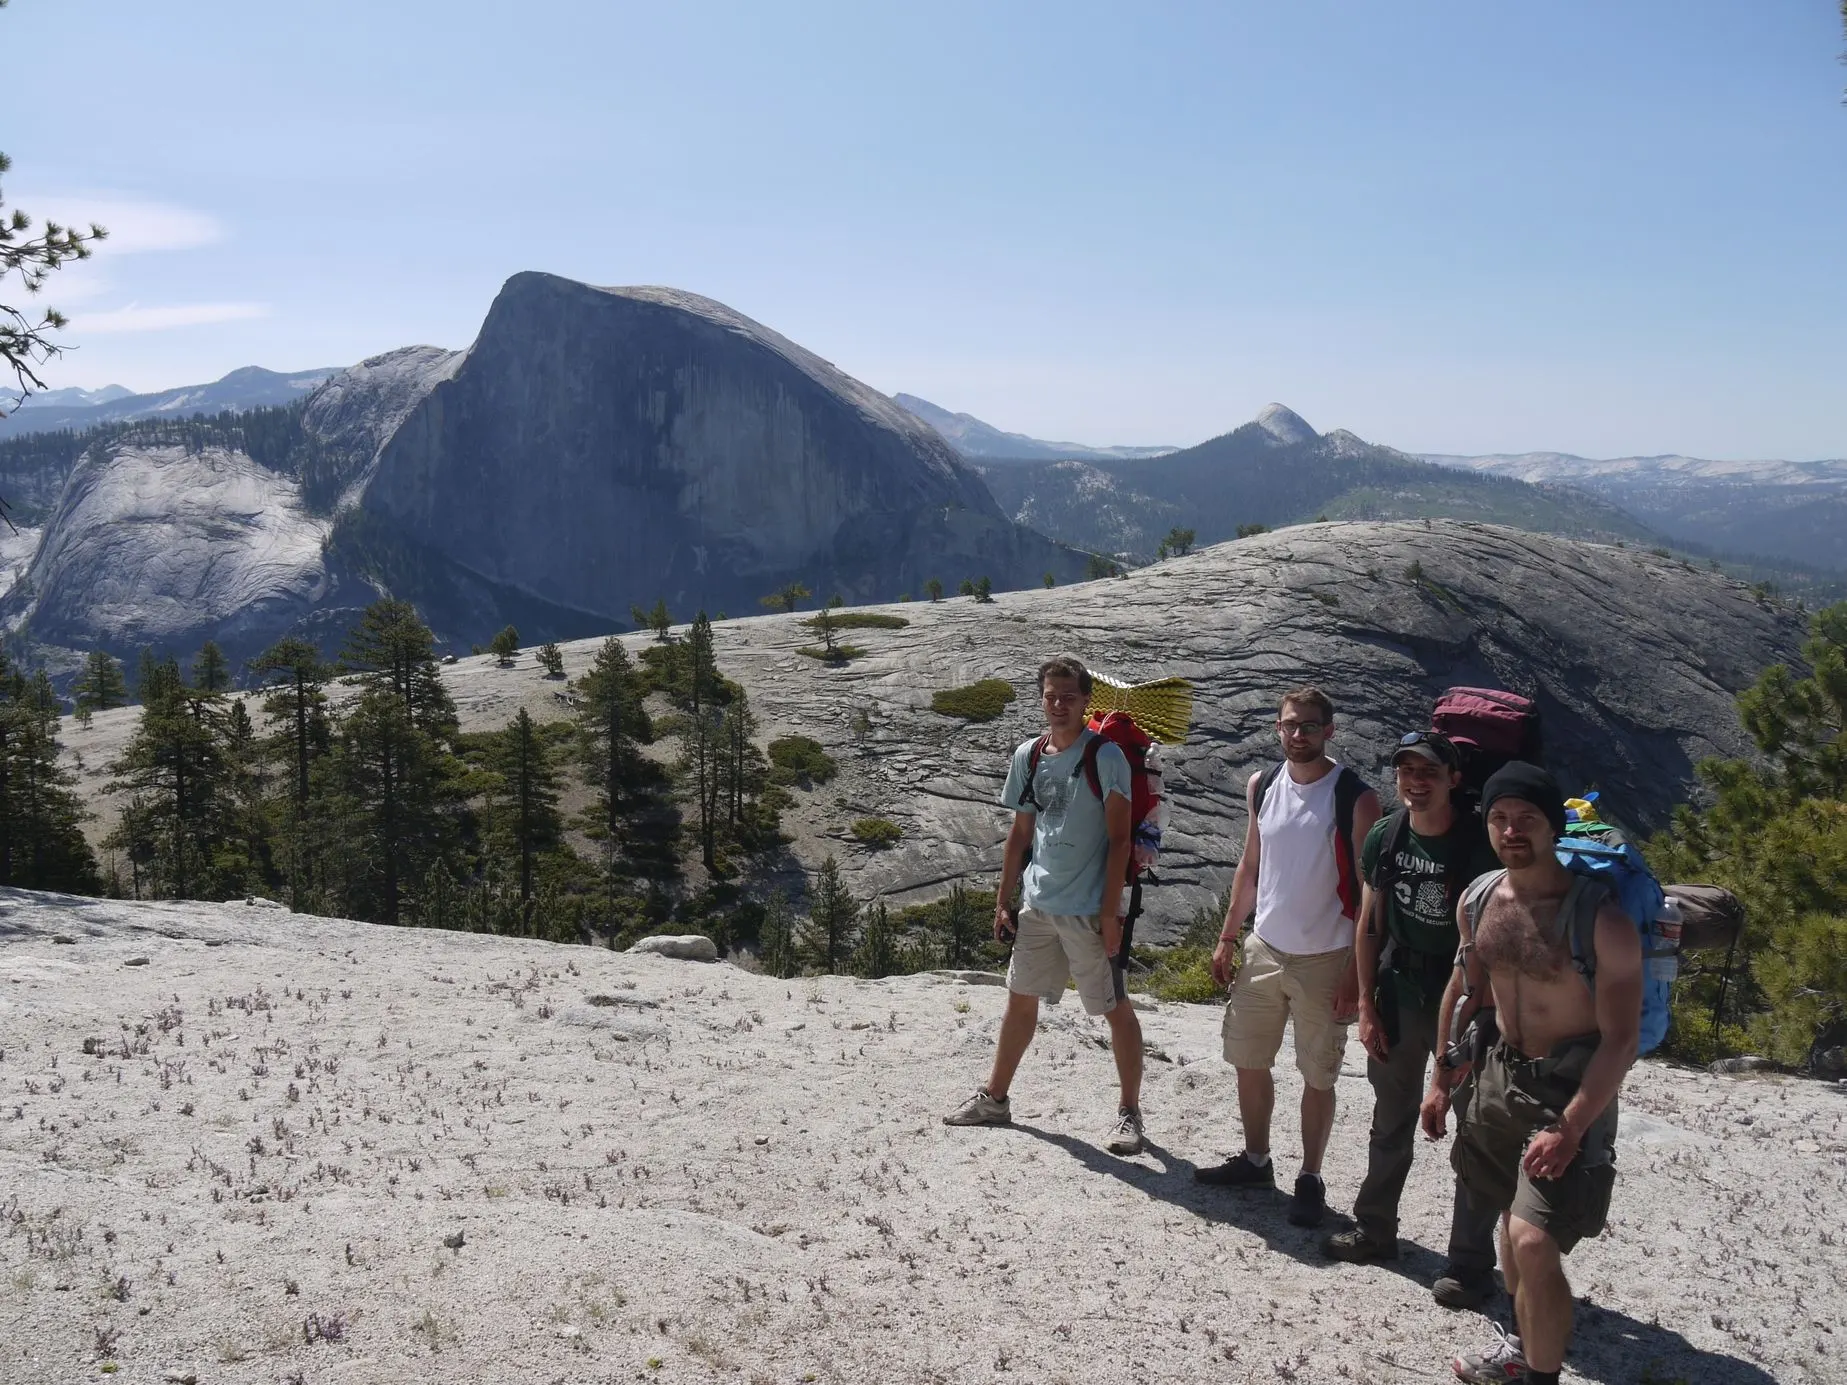 Our group with half-dome in the background